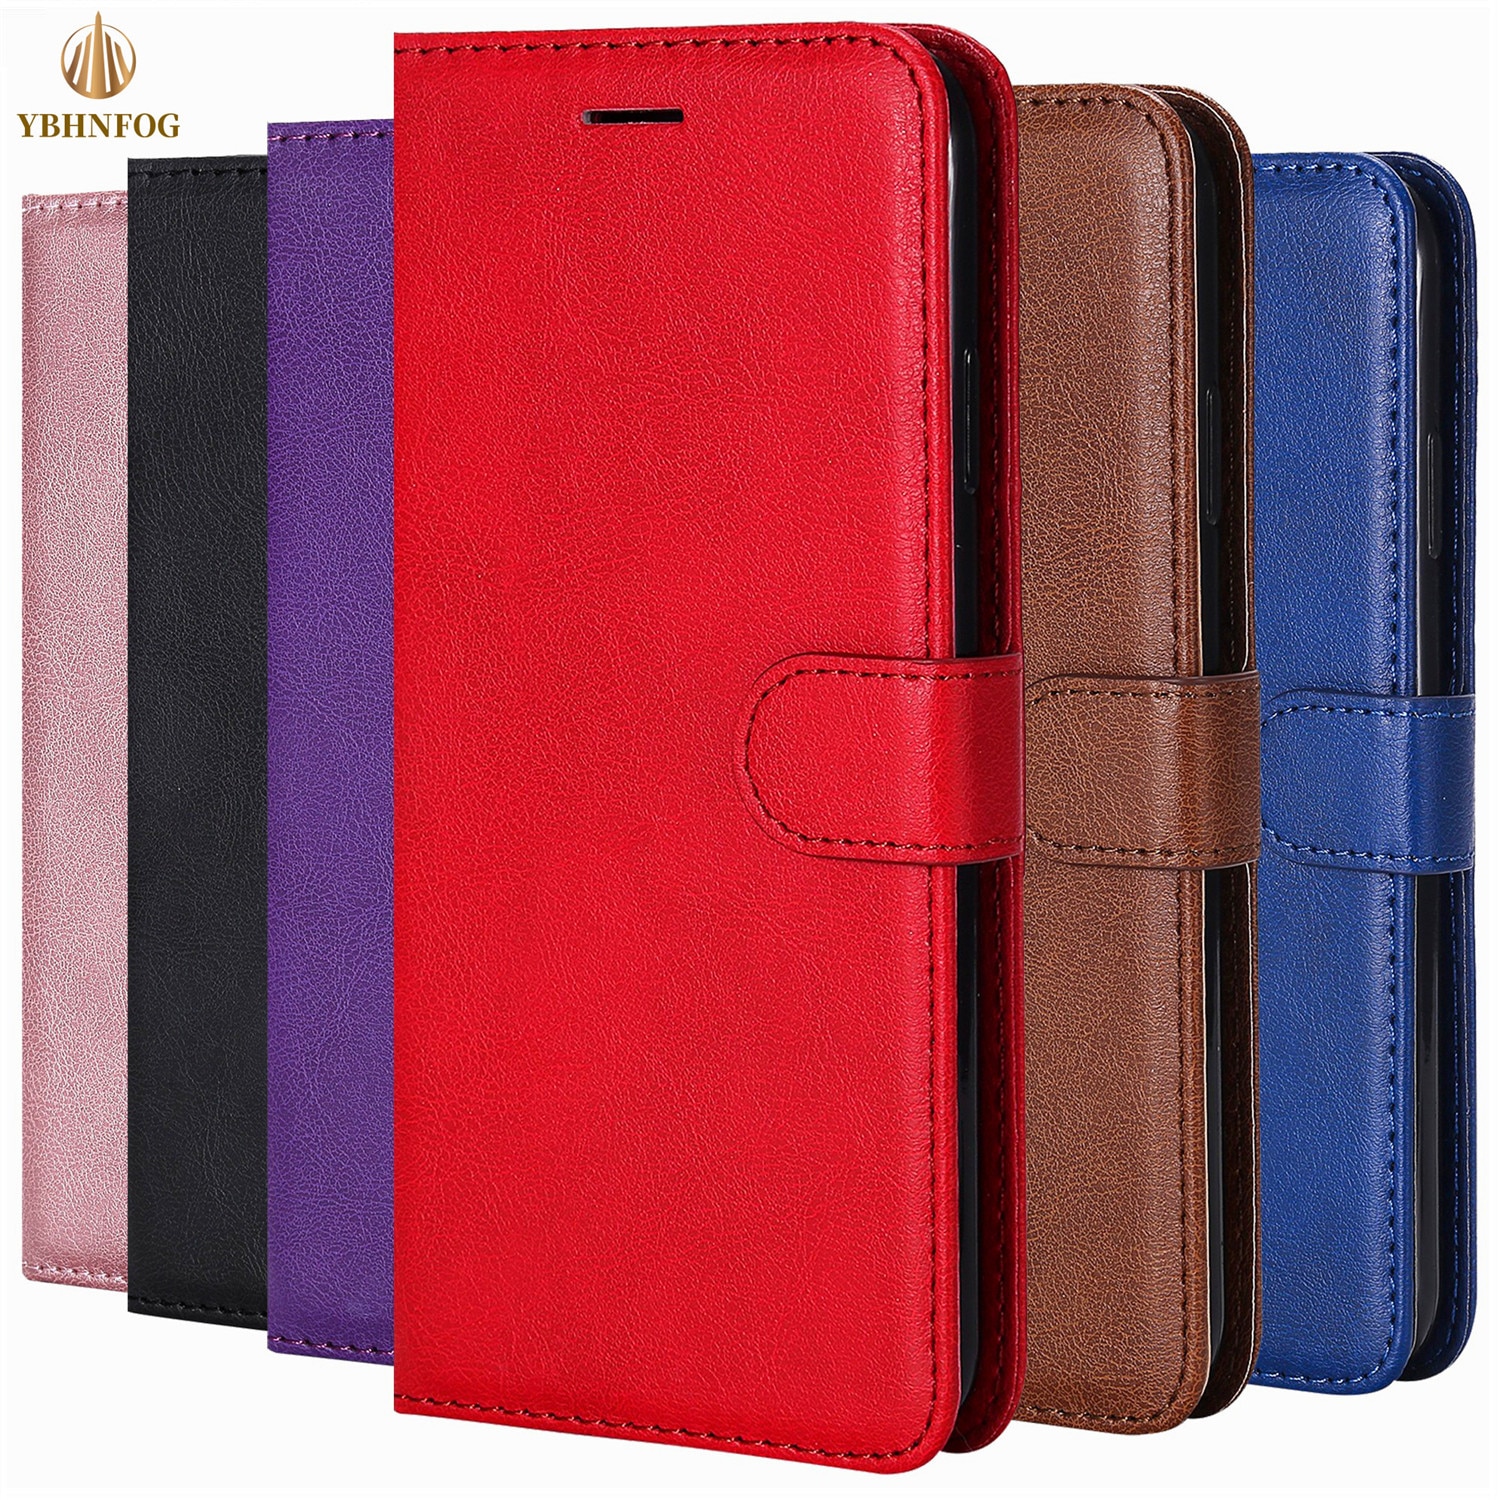 Luxury Leather Wallet Case For iPhone 14 13 12 Mini 11 Pro XS MAX XR 6 6S 7 8 Plus Card Flip Stand Cover For iPhone 5 5S SE 2020